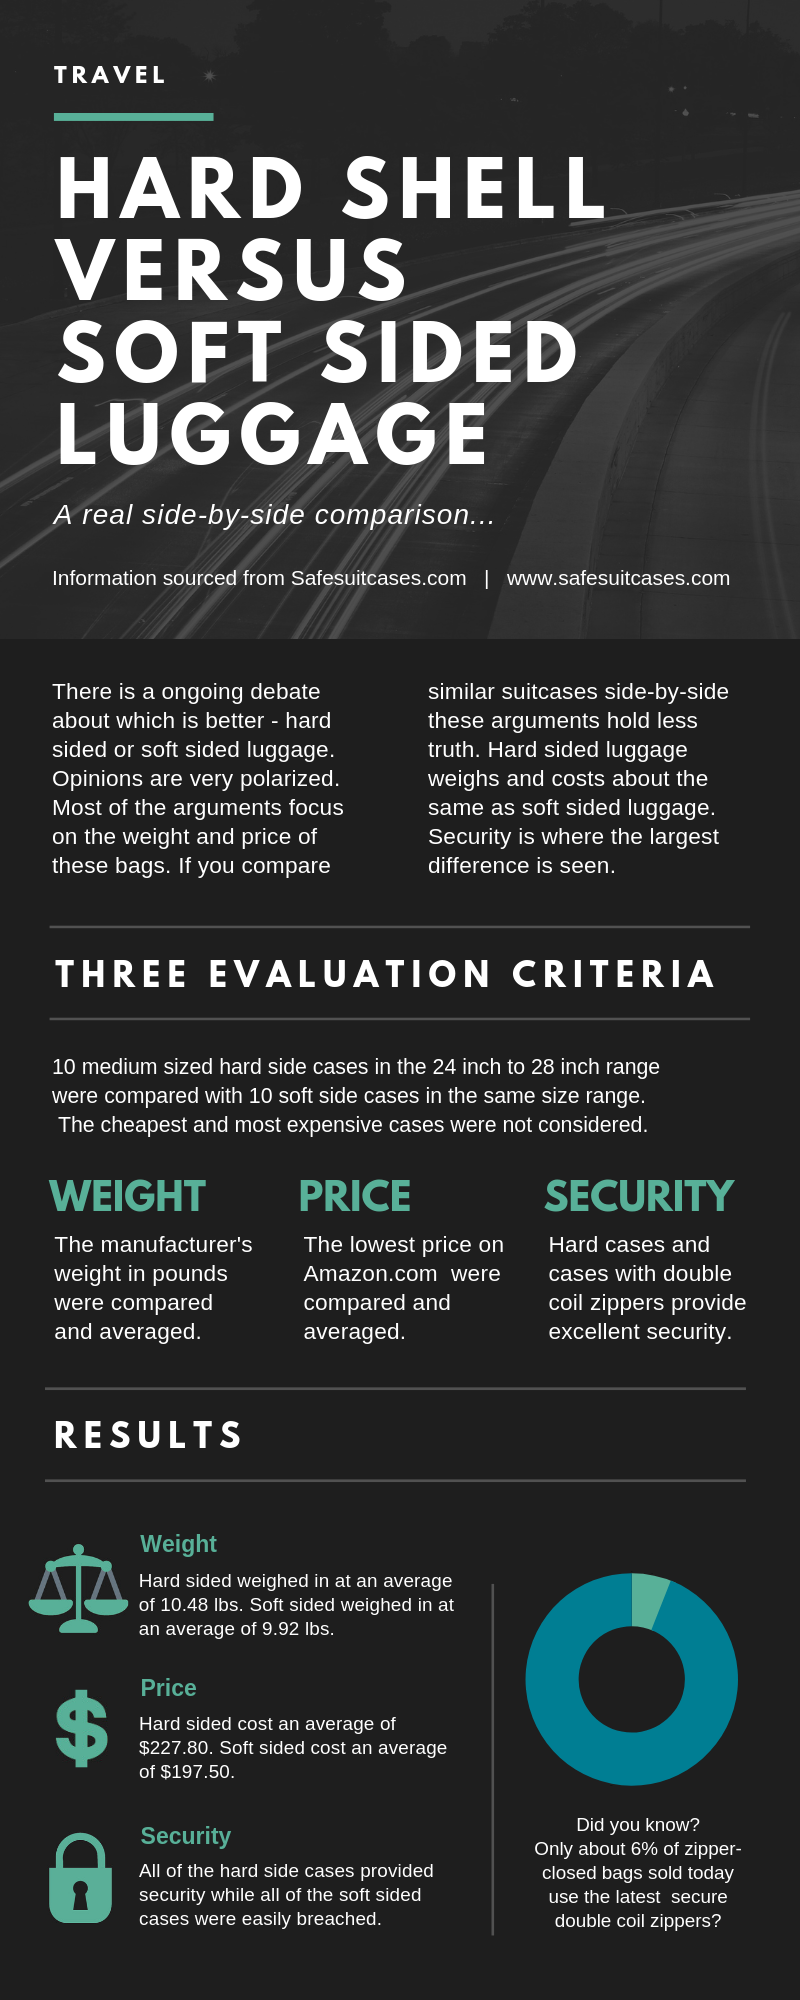 Hard shell versus soft sided luggage info graphic